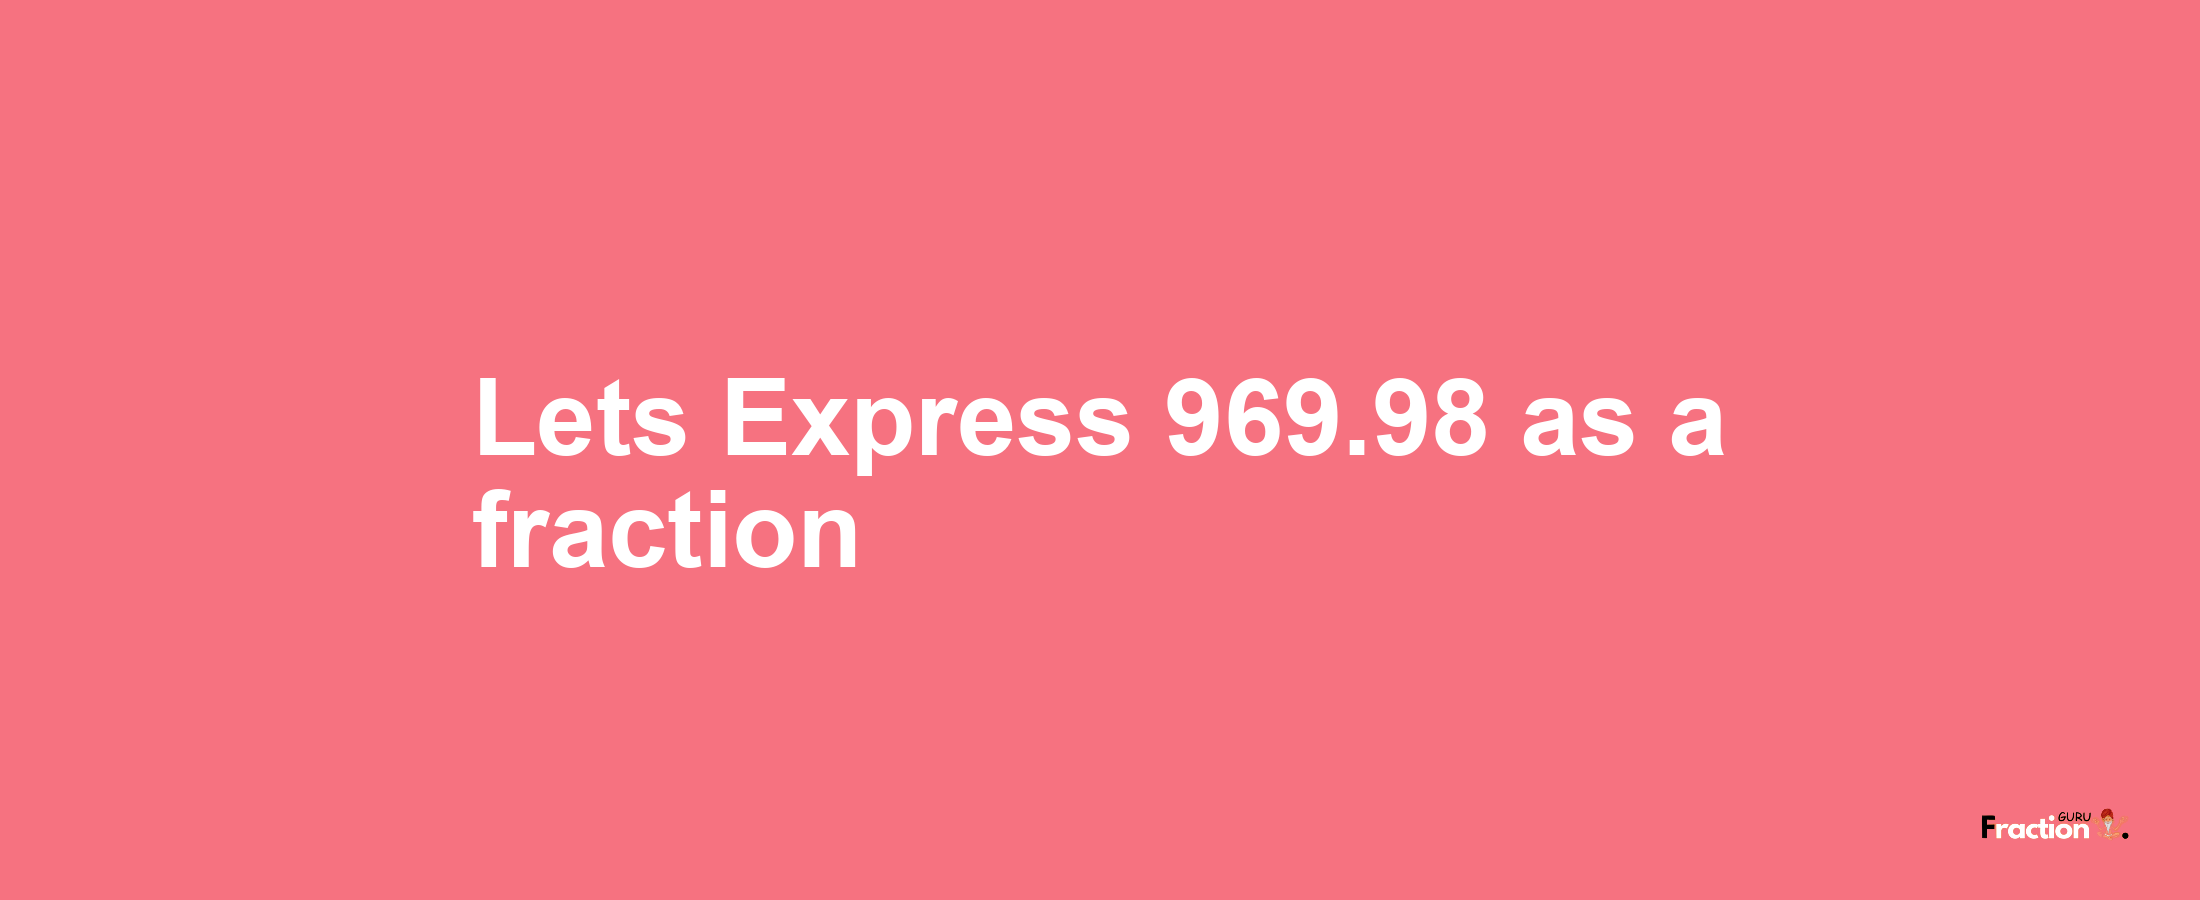 Lets Express 969.98 as afraction